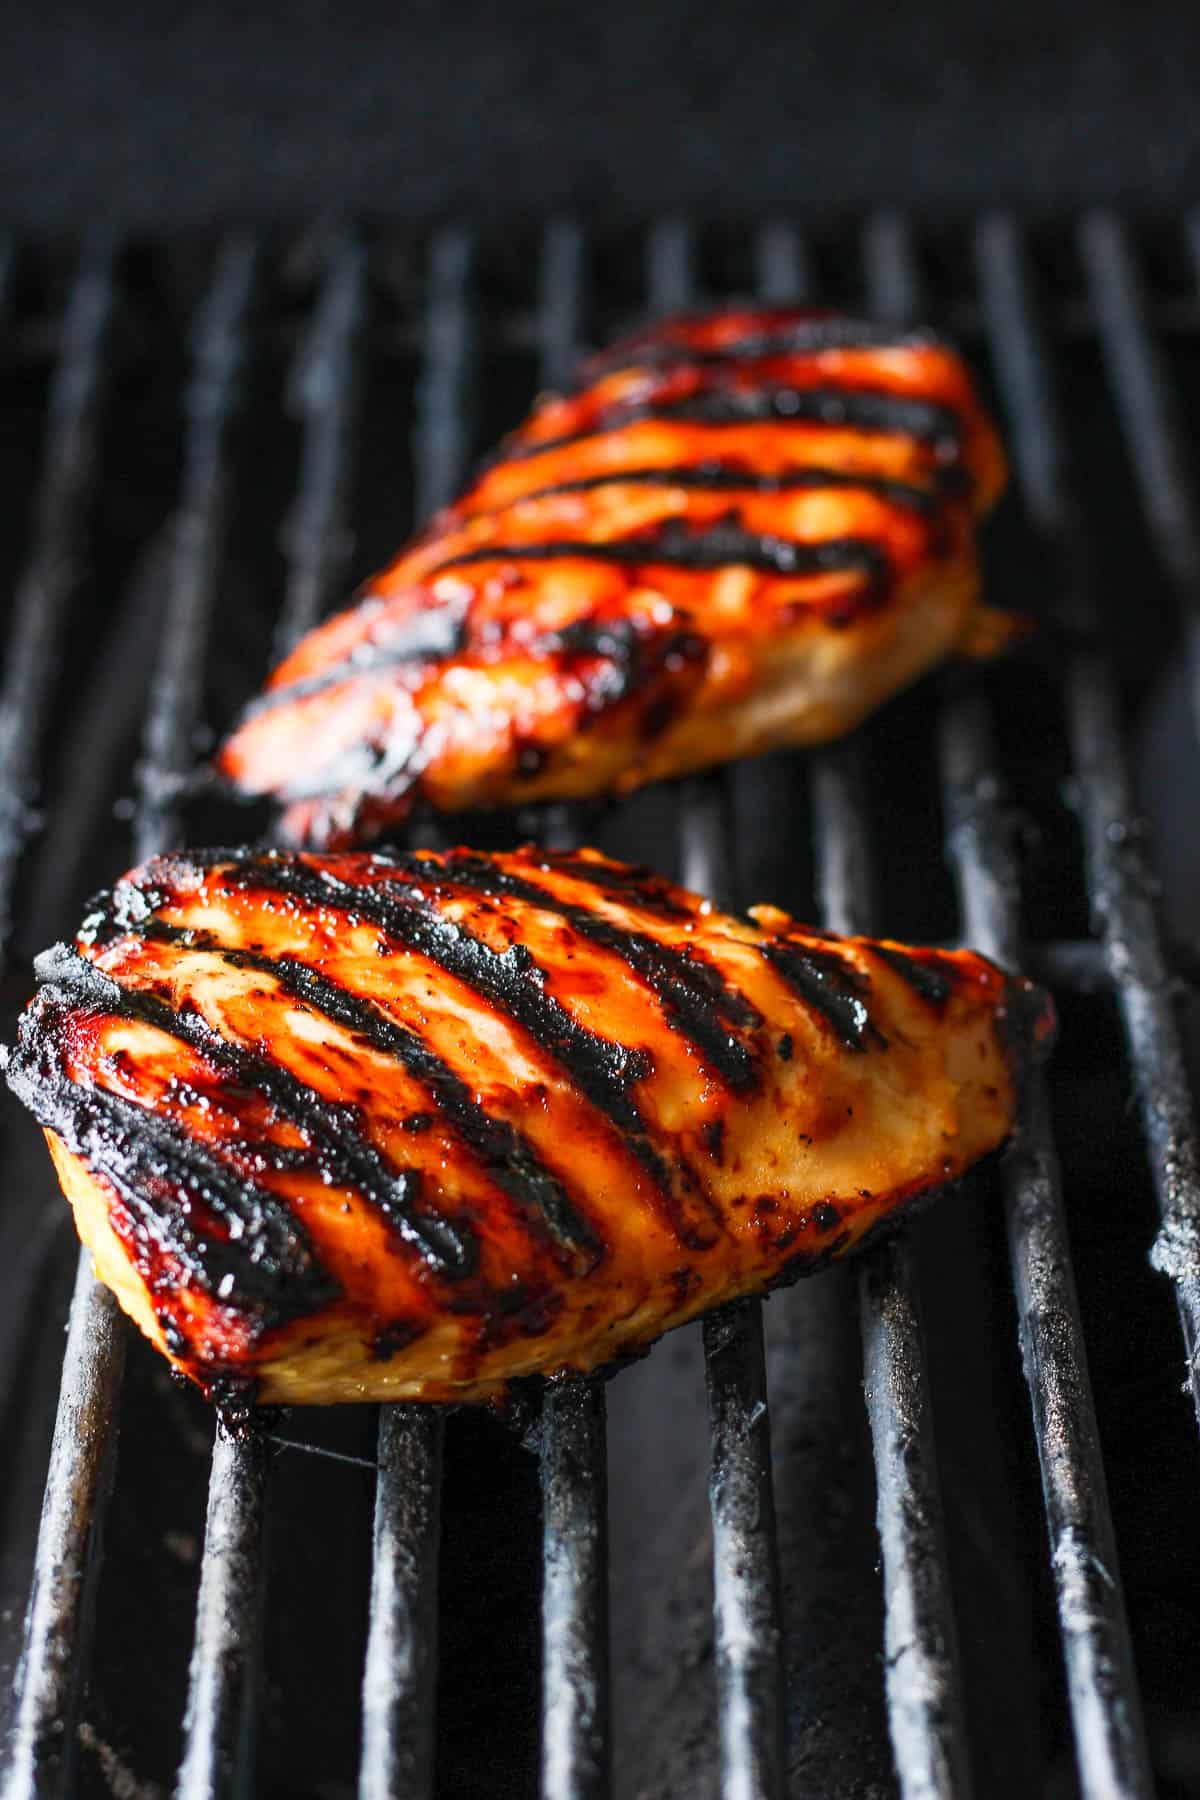 Two chicken breasts on the grill.